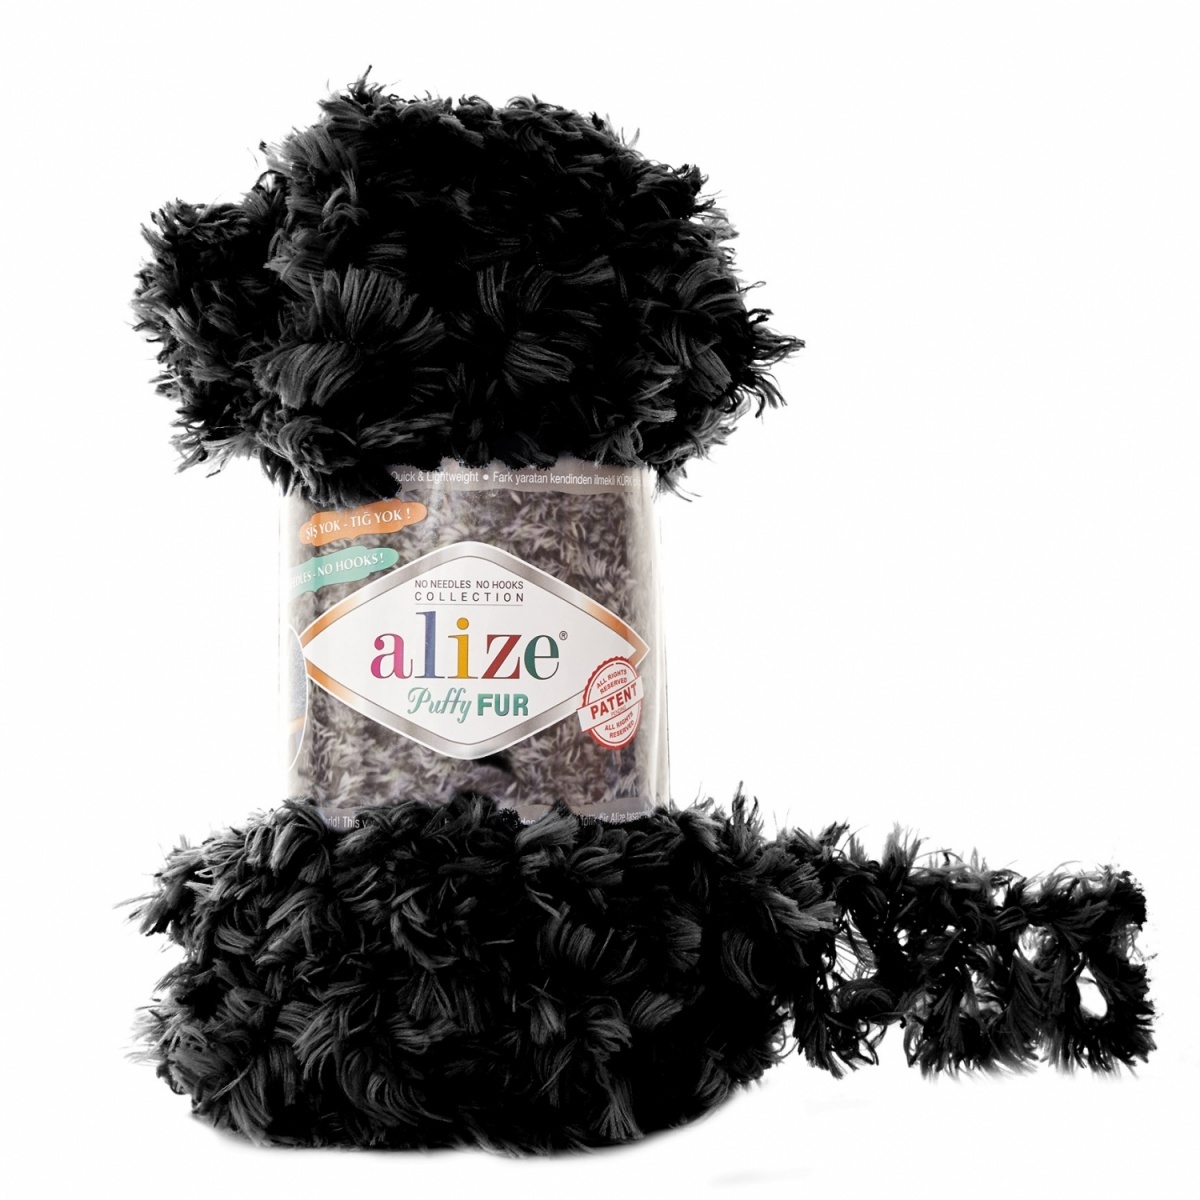 Alize Puffy Fur, 100% Polyester 5 Skein Value Pack, 500g фото 2